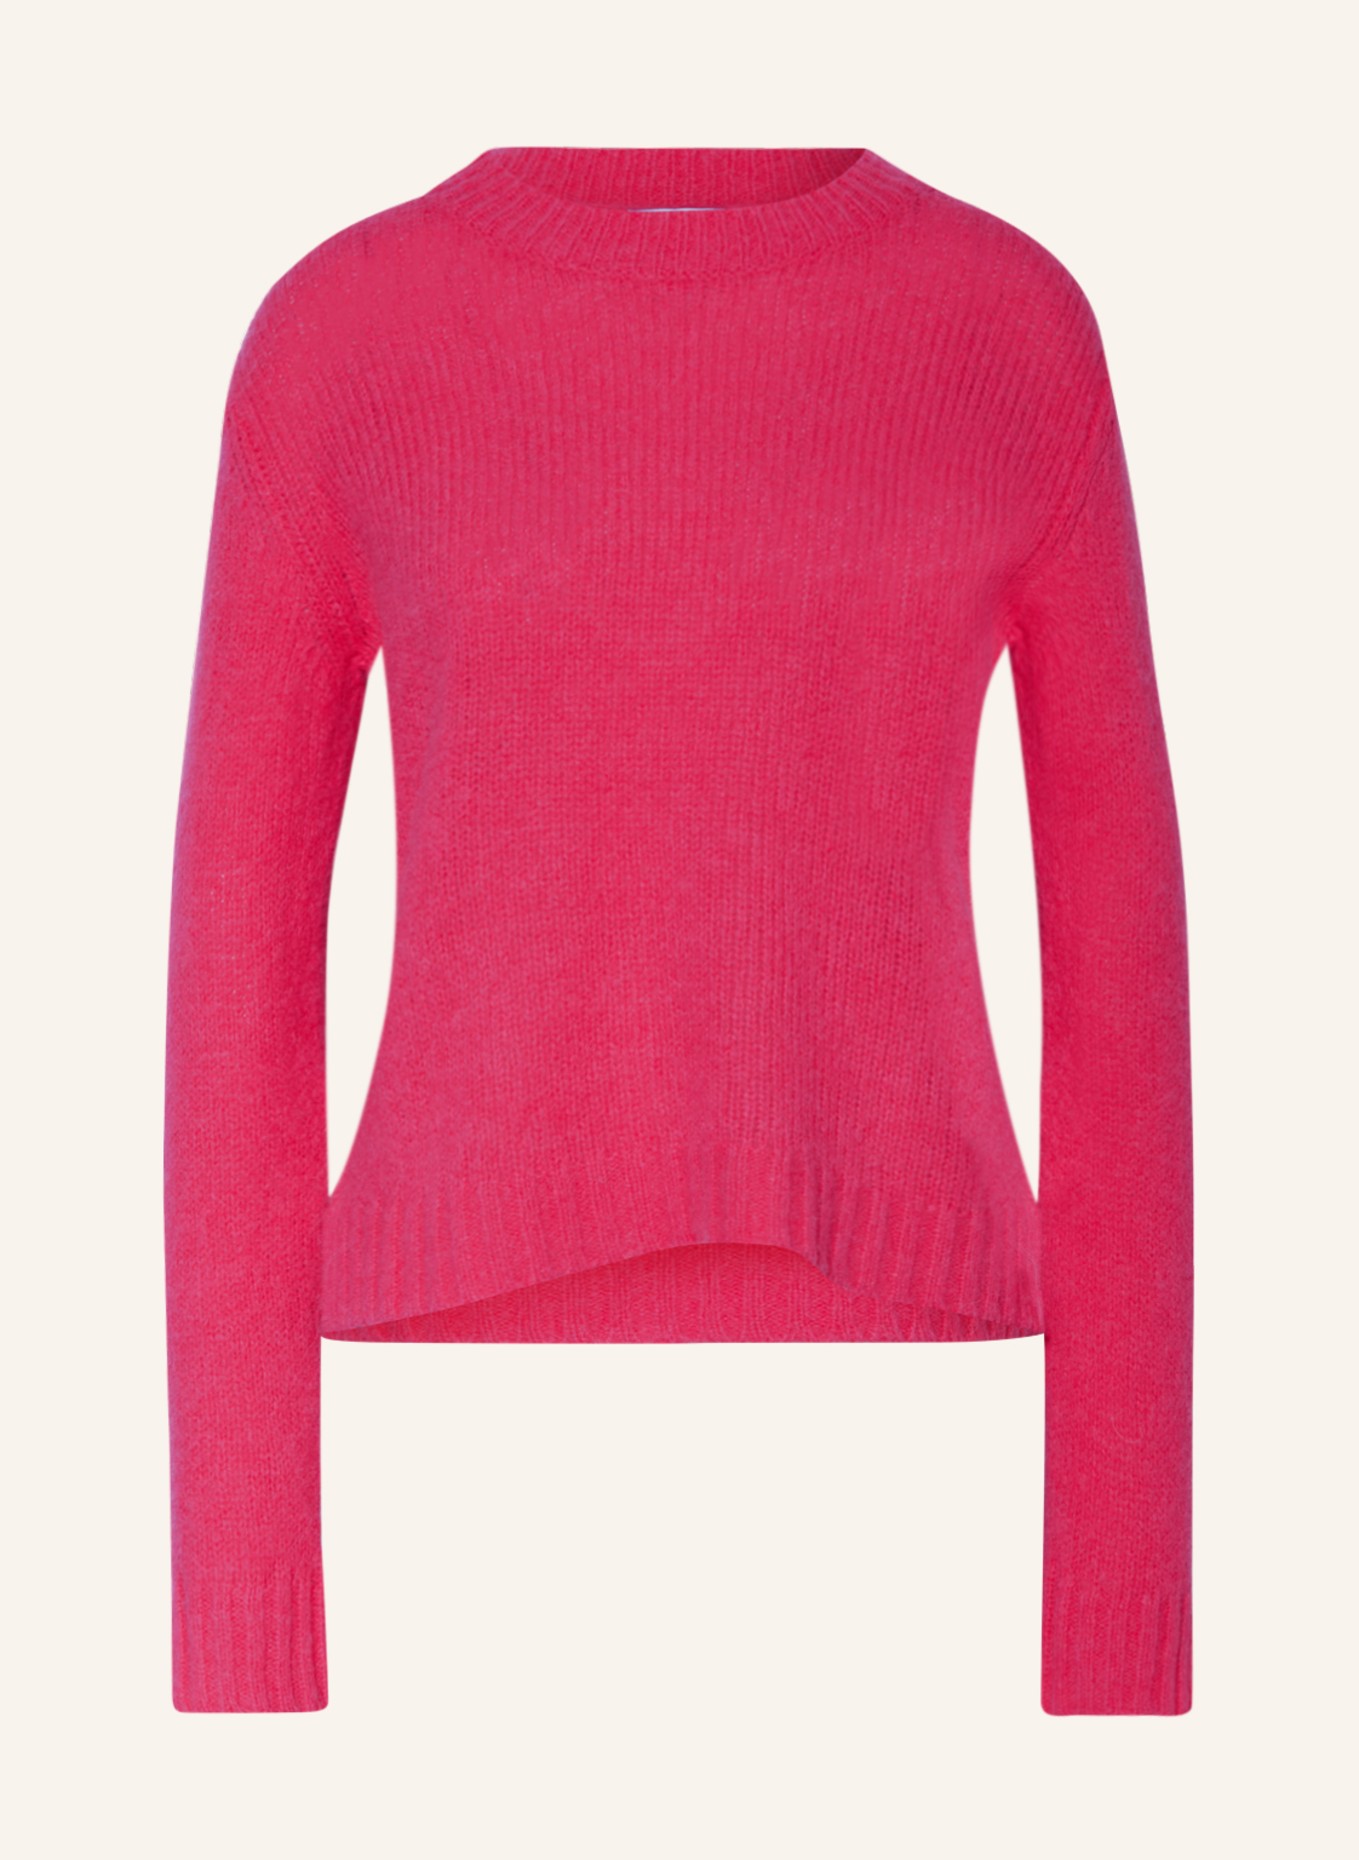 Princess GOES HOLLYWOOD Oversized-Pullover, Farbe: PINK (Bild 1)